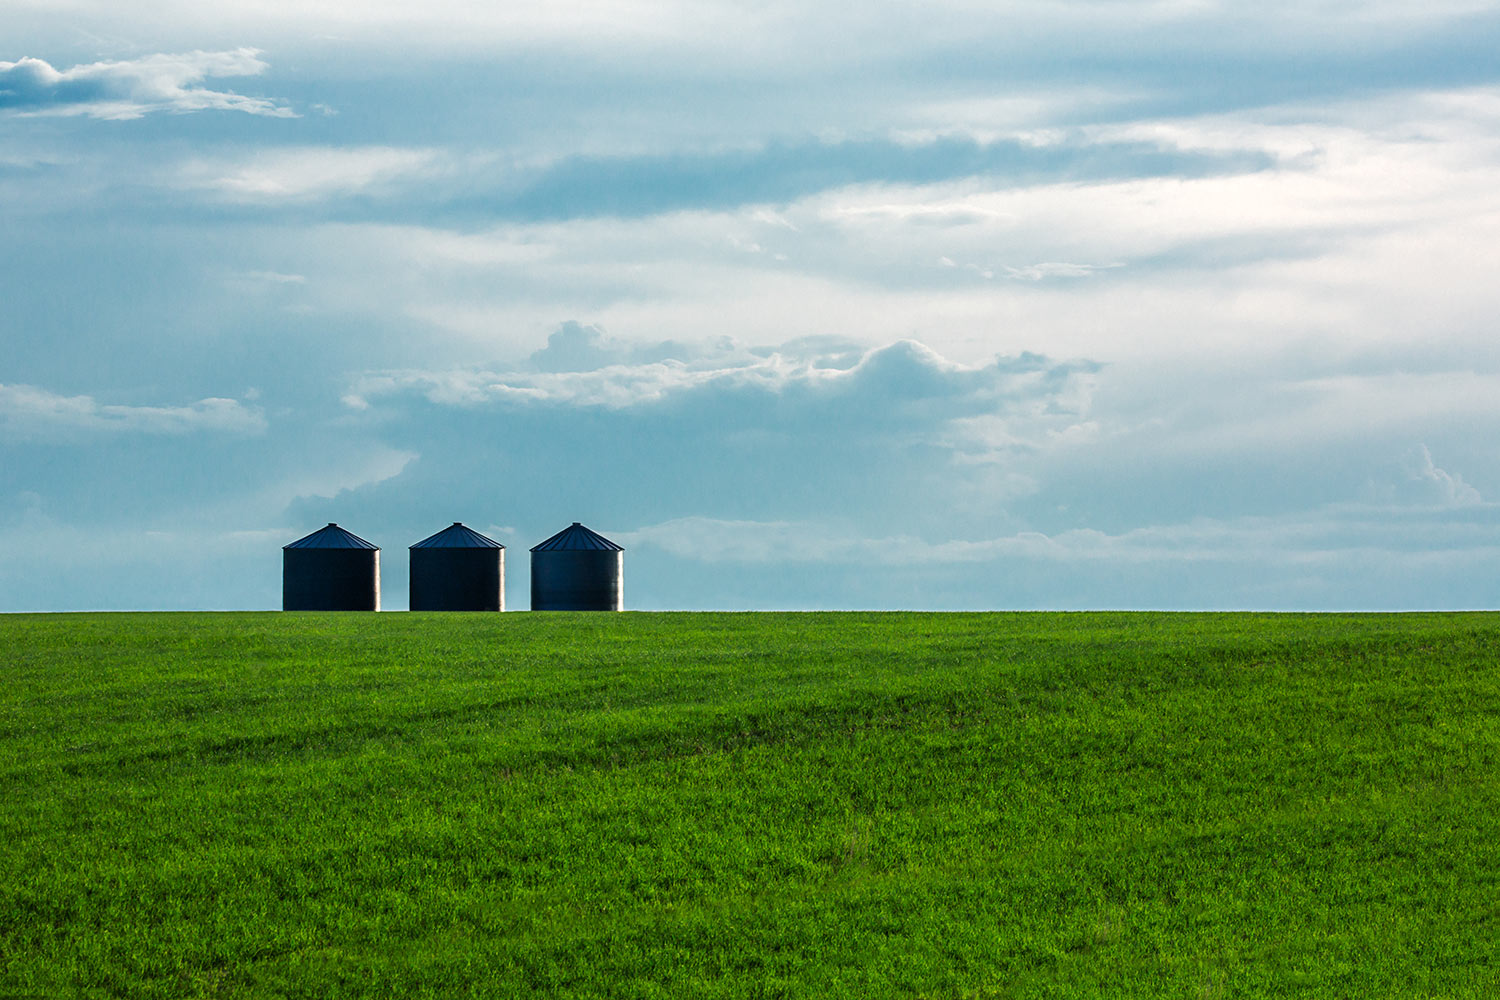 Three grain bins surrounded by a field of young green wheat near Great Falls, Montana.&nbsp;→ Buy a Print